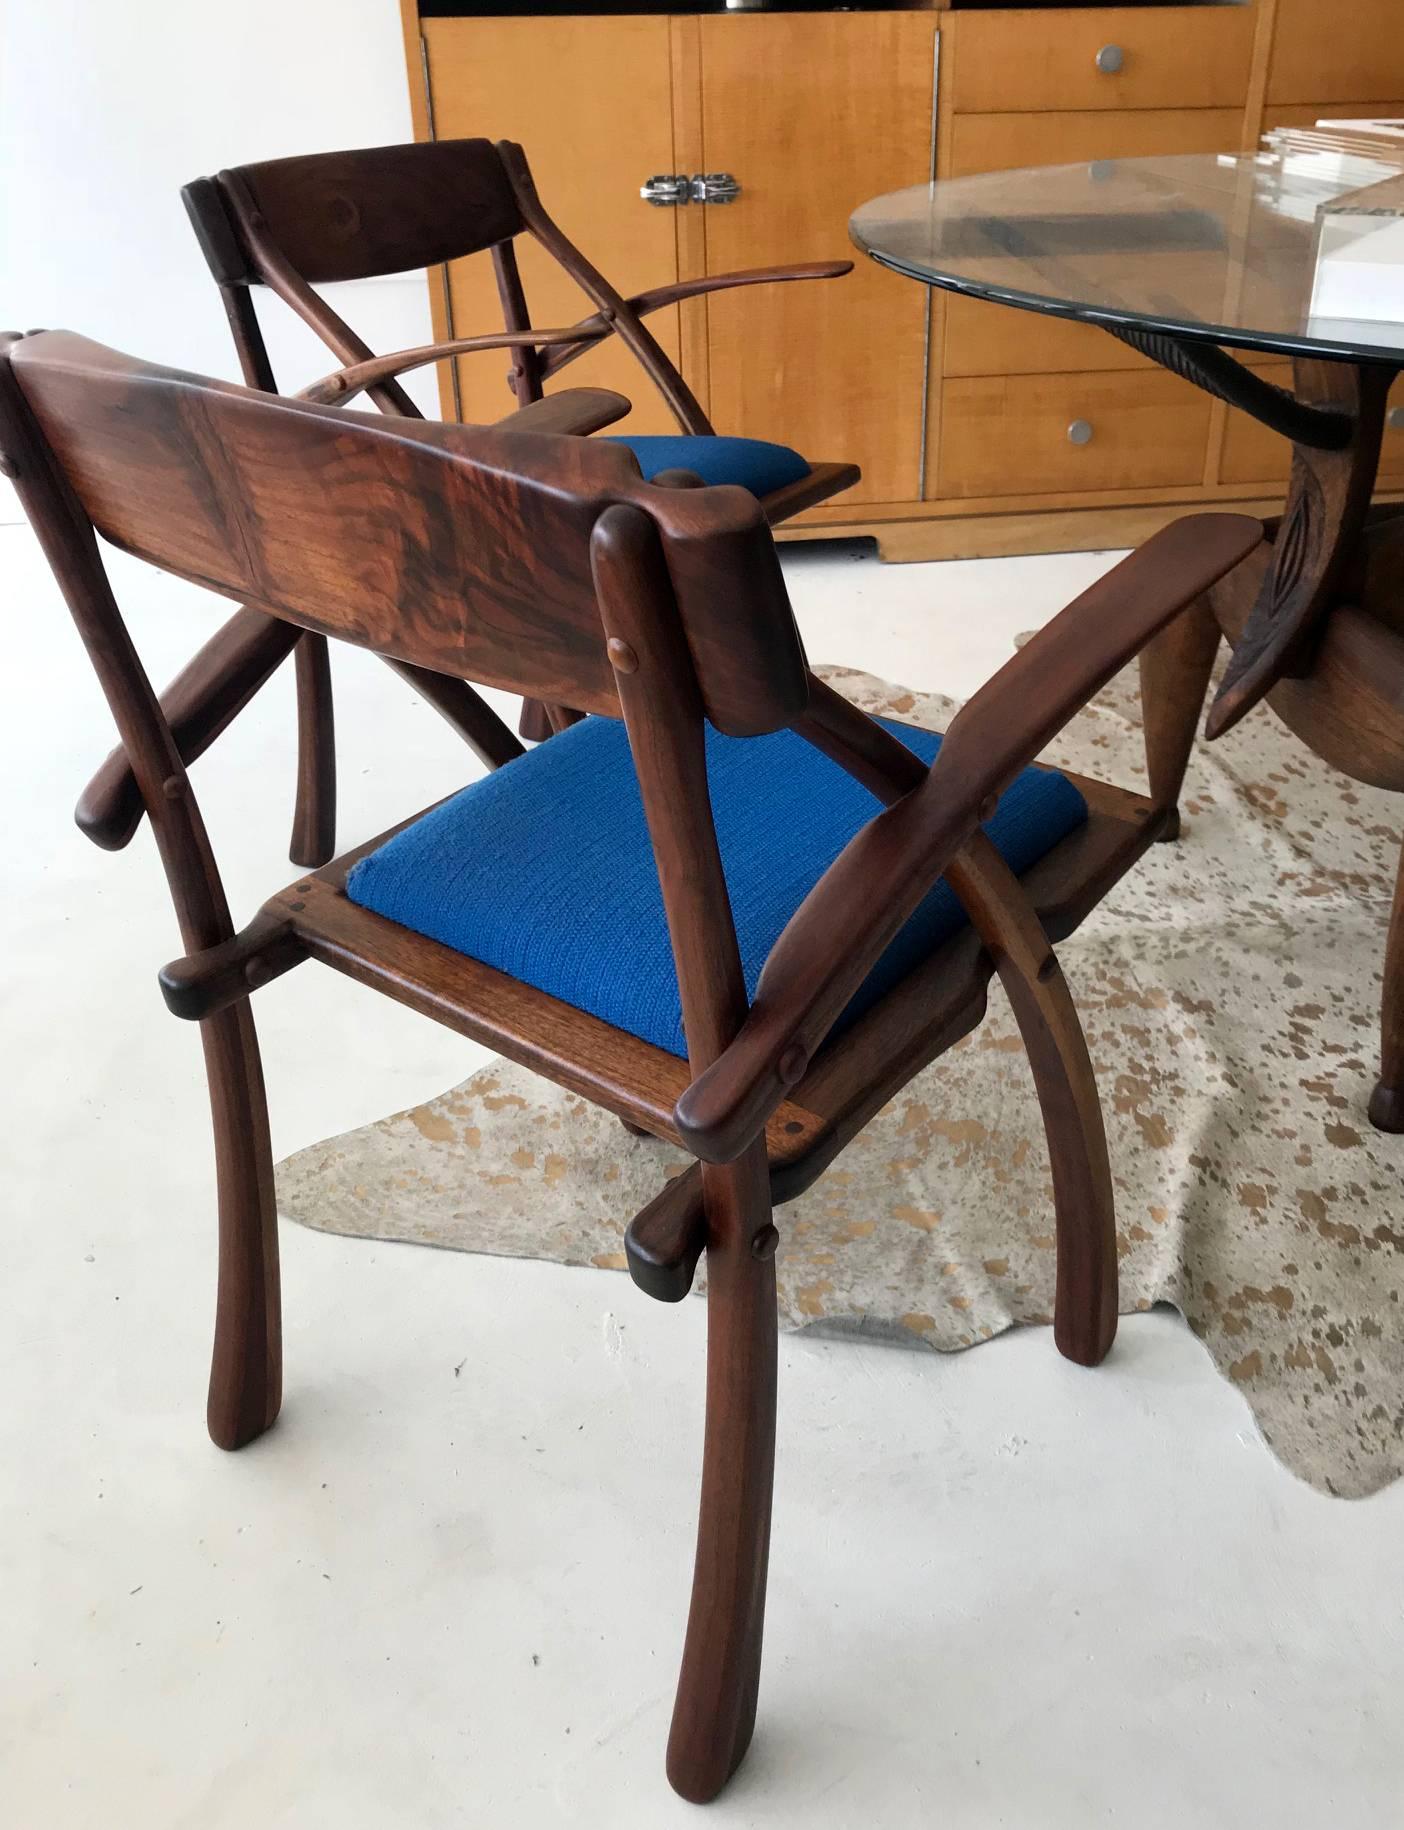 A rare pair of wishbone armchairs studio made by Arthur Espenet Carpenter (1920-2006), Bolinas, CA. In grained walnut with visible dowel construction, a shaped back that continues intoto the contoured arms. Upholstered seats provide comfort and